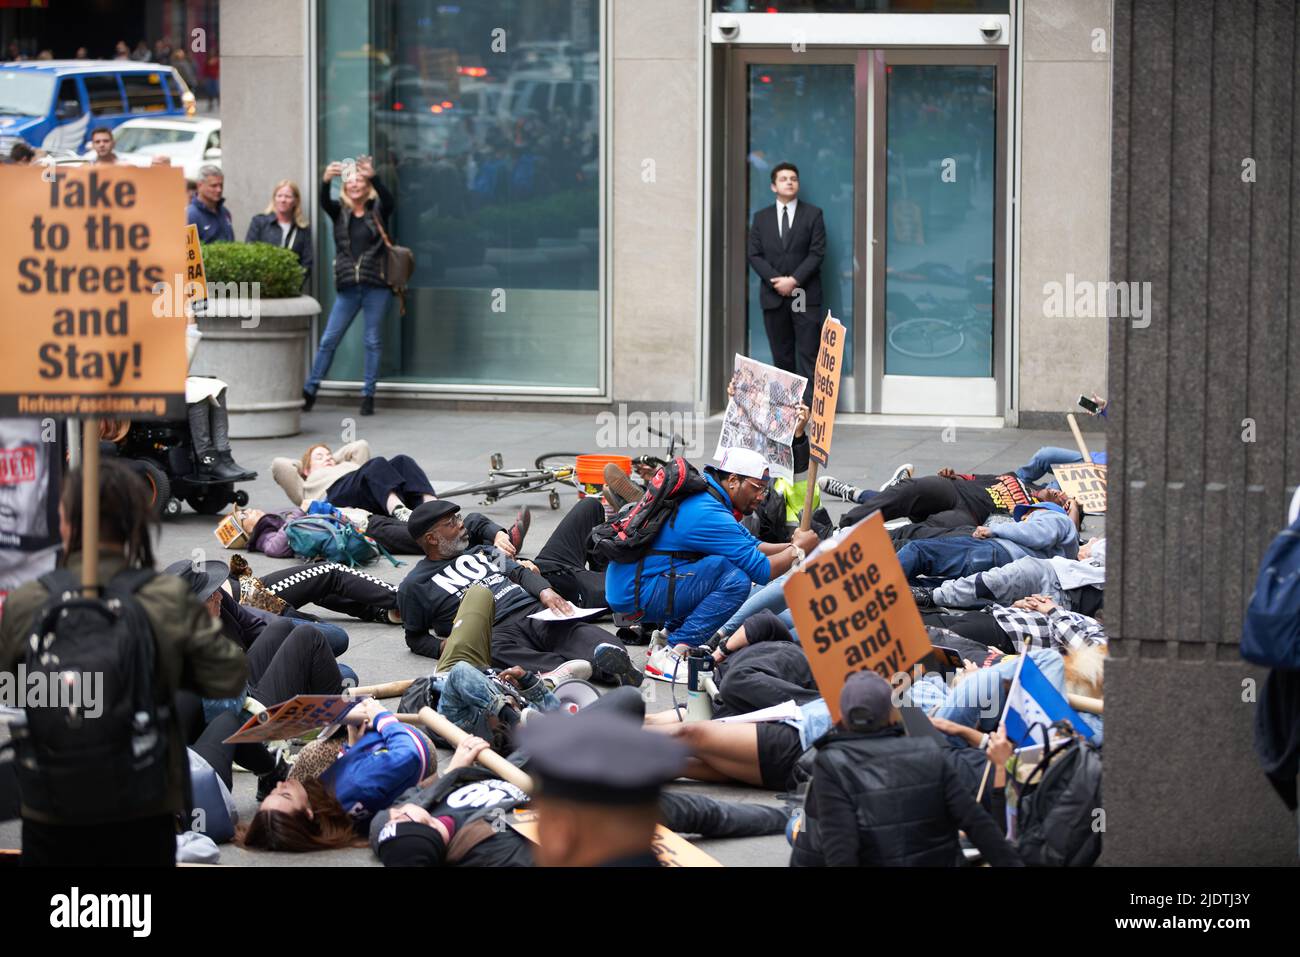 Manhattan, New York,USA - October 26. 2019: People protesting in front of Fox News building in NYC. Donald Trump protest in Manhattan. People lying on Stock Photo